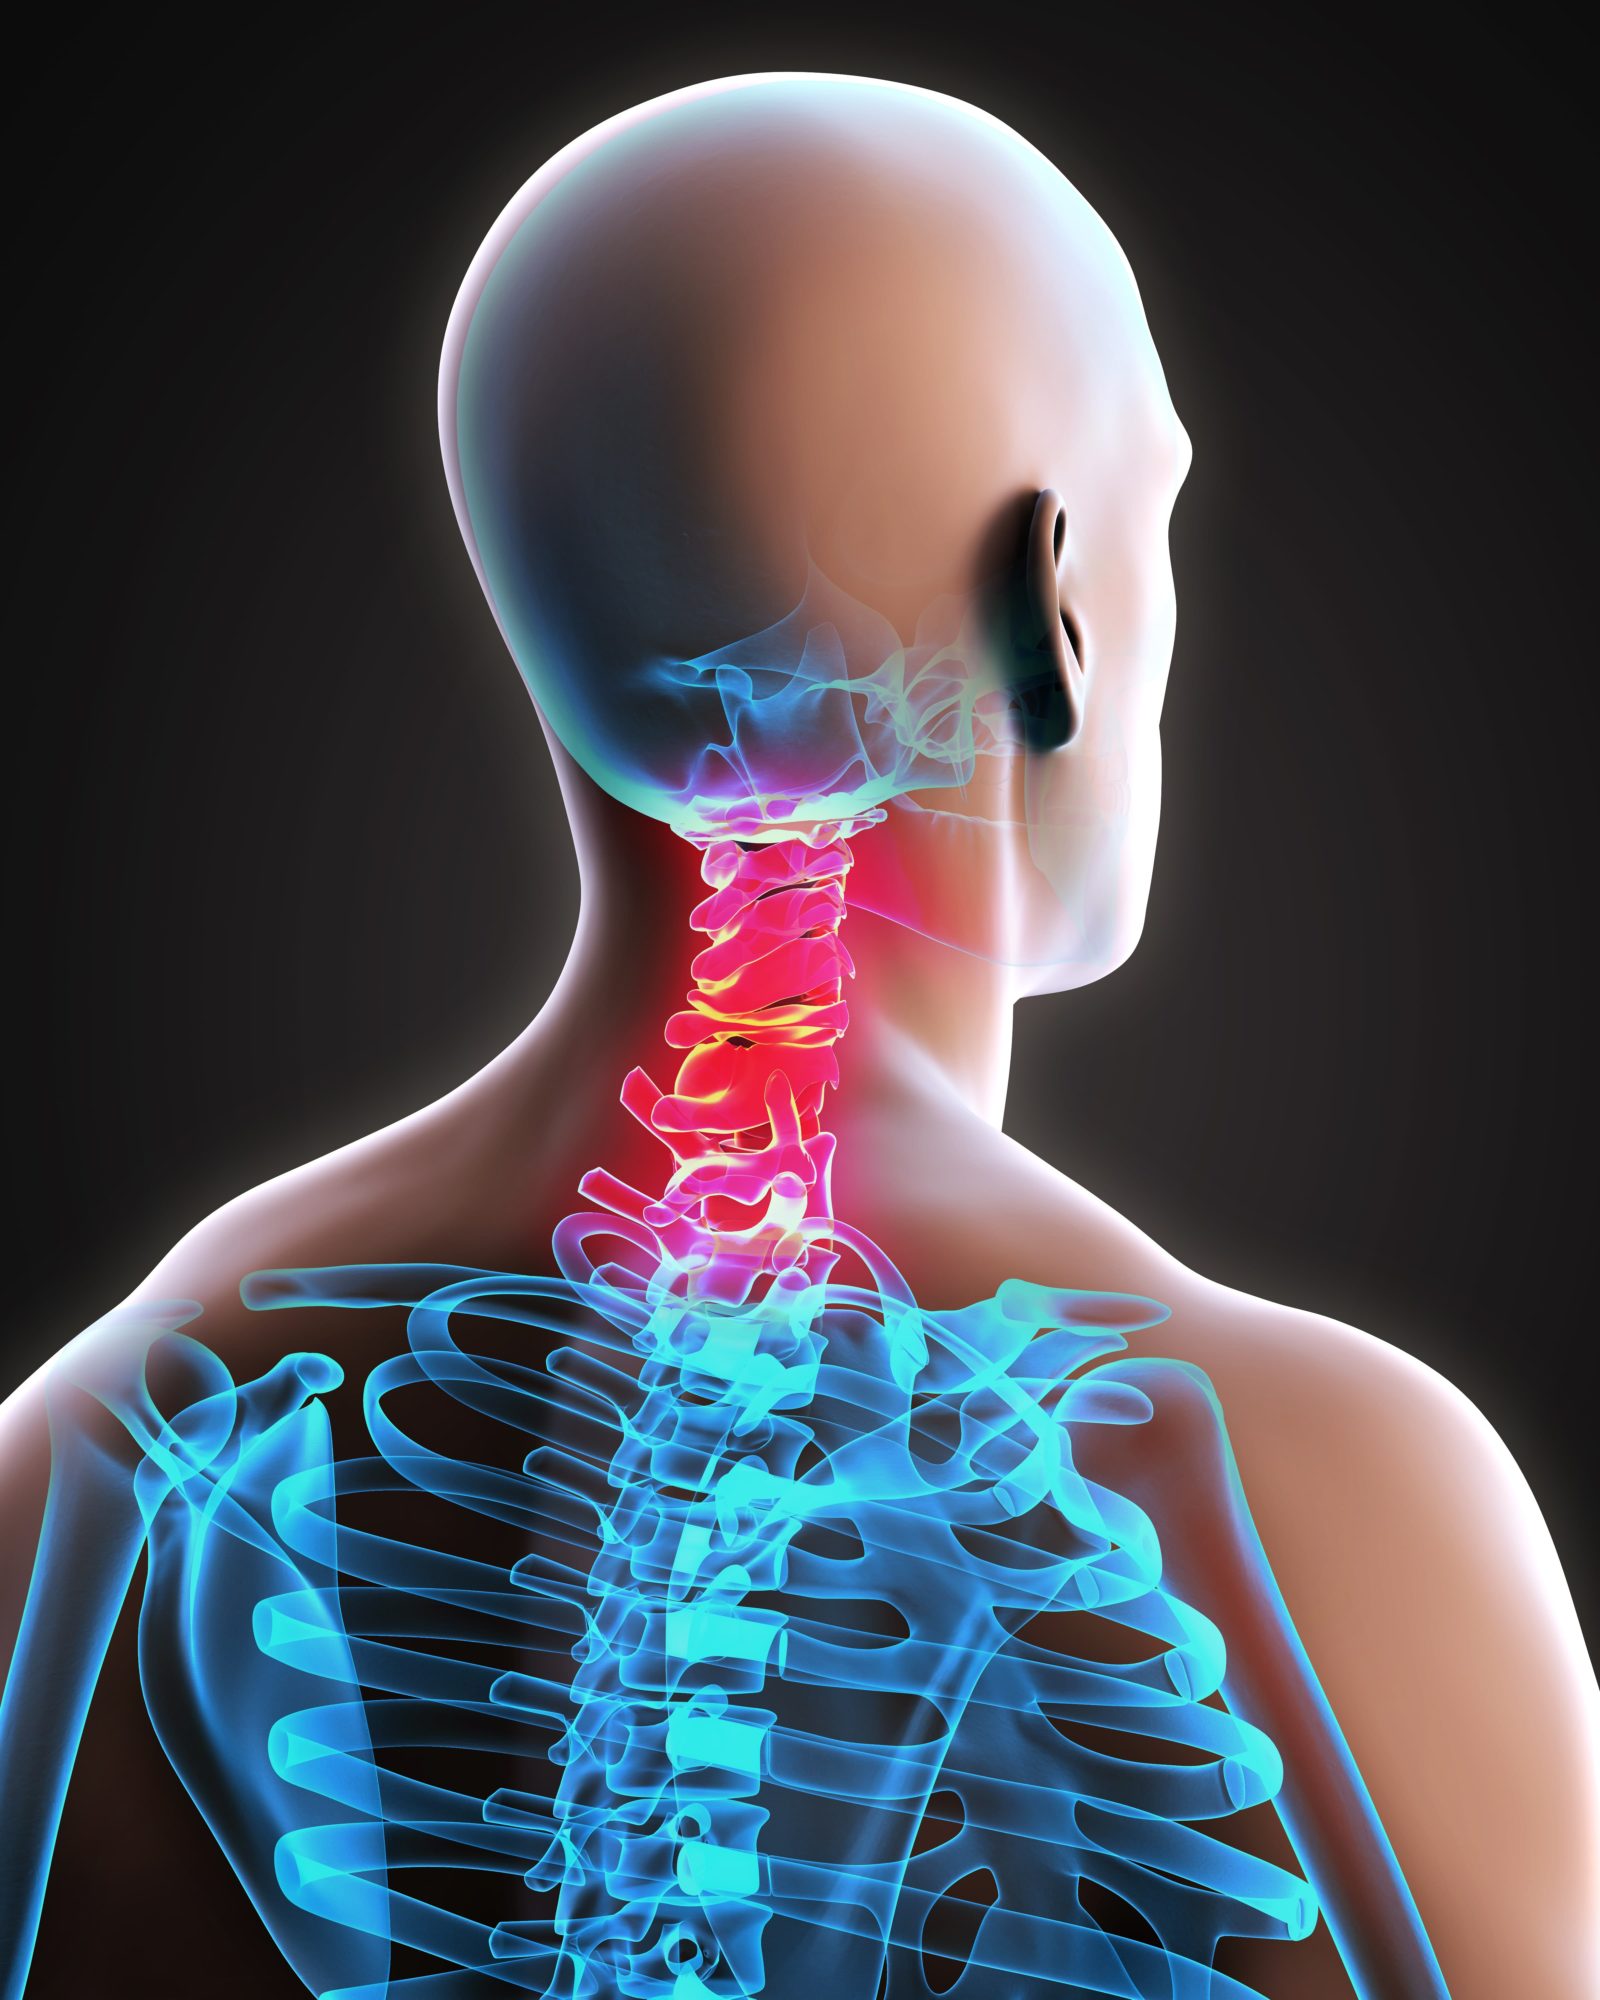 neck shown in red, rest of spine in blue